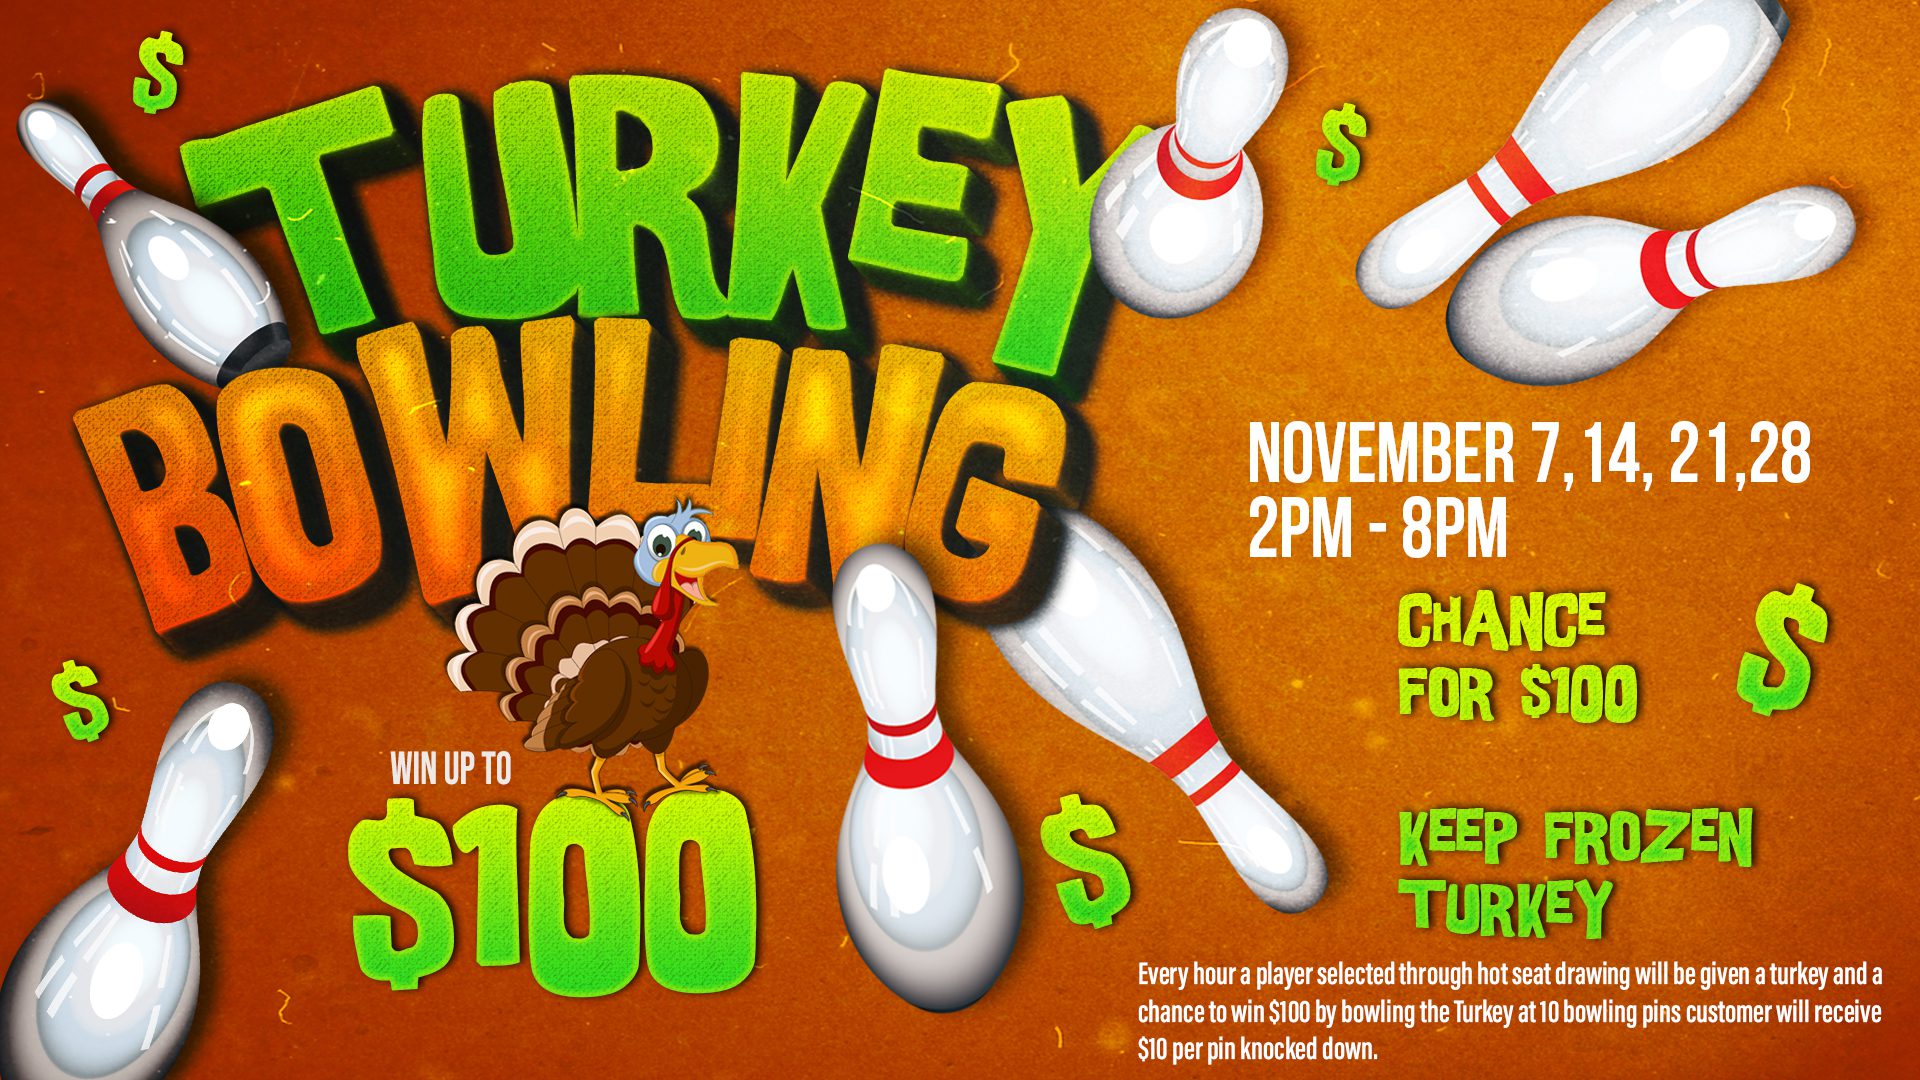 A turkey bowling event with turkeys and the price of the bowl.